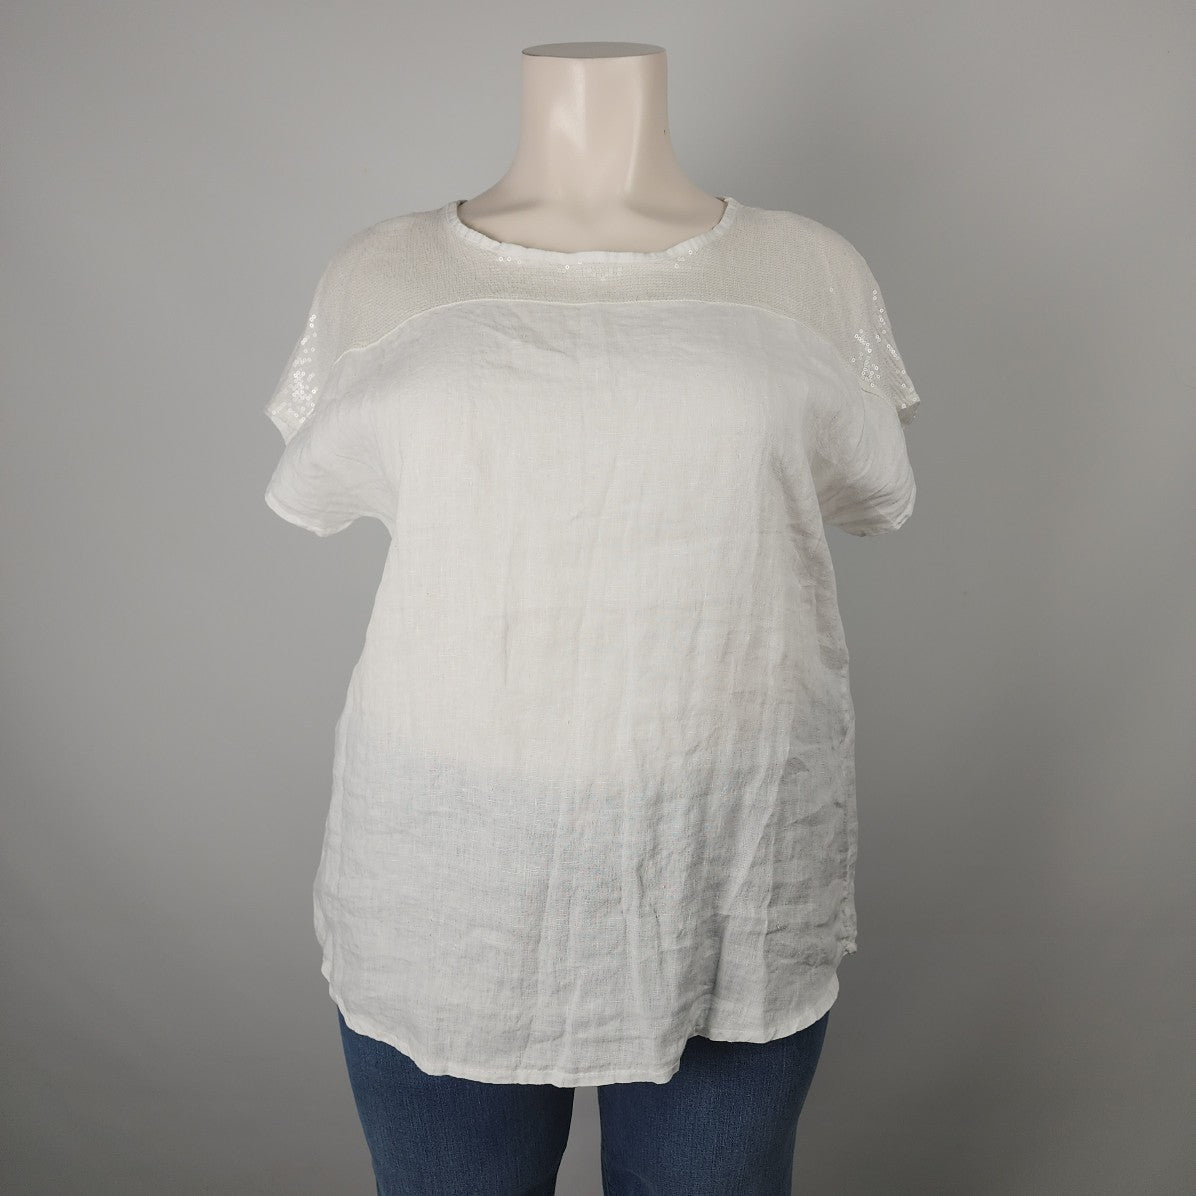 Lungo Lino White Linen Sequined Top Size 1XL